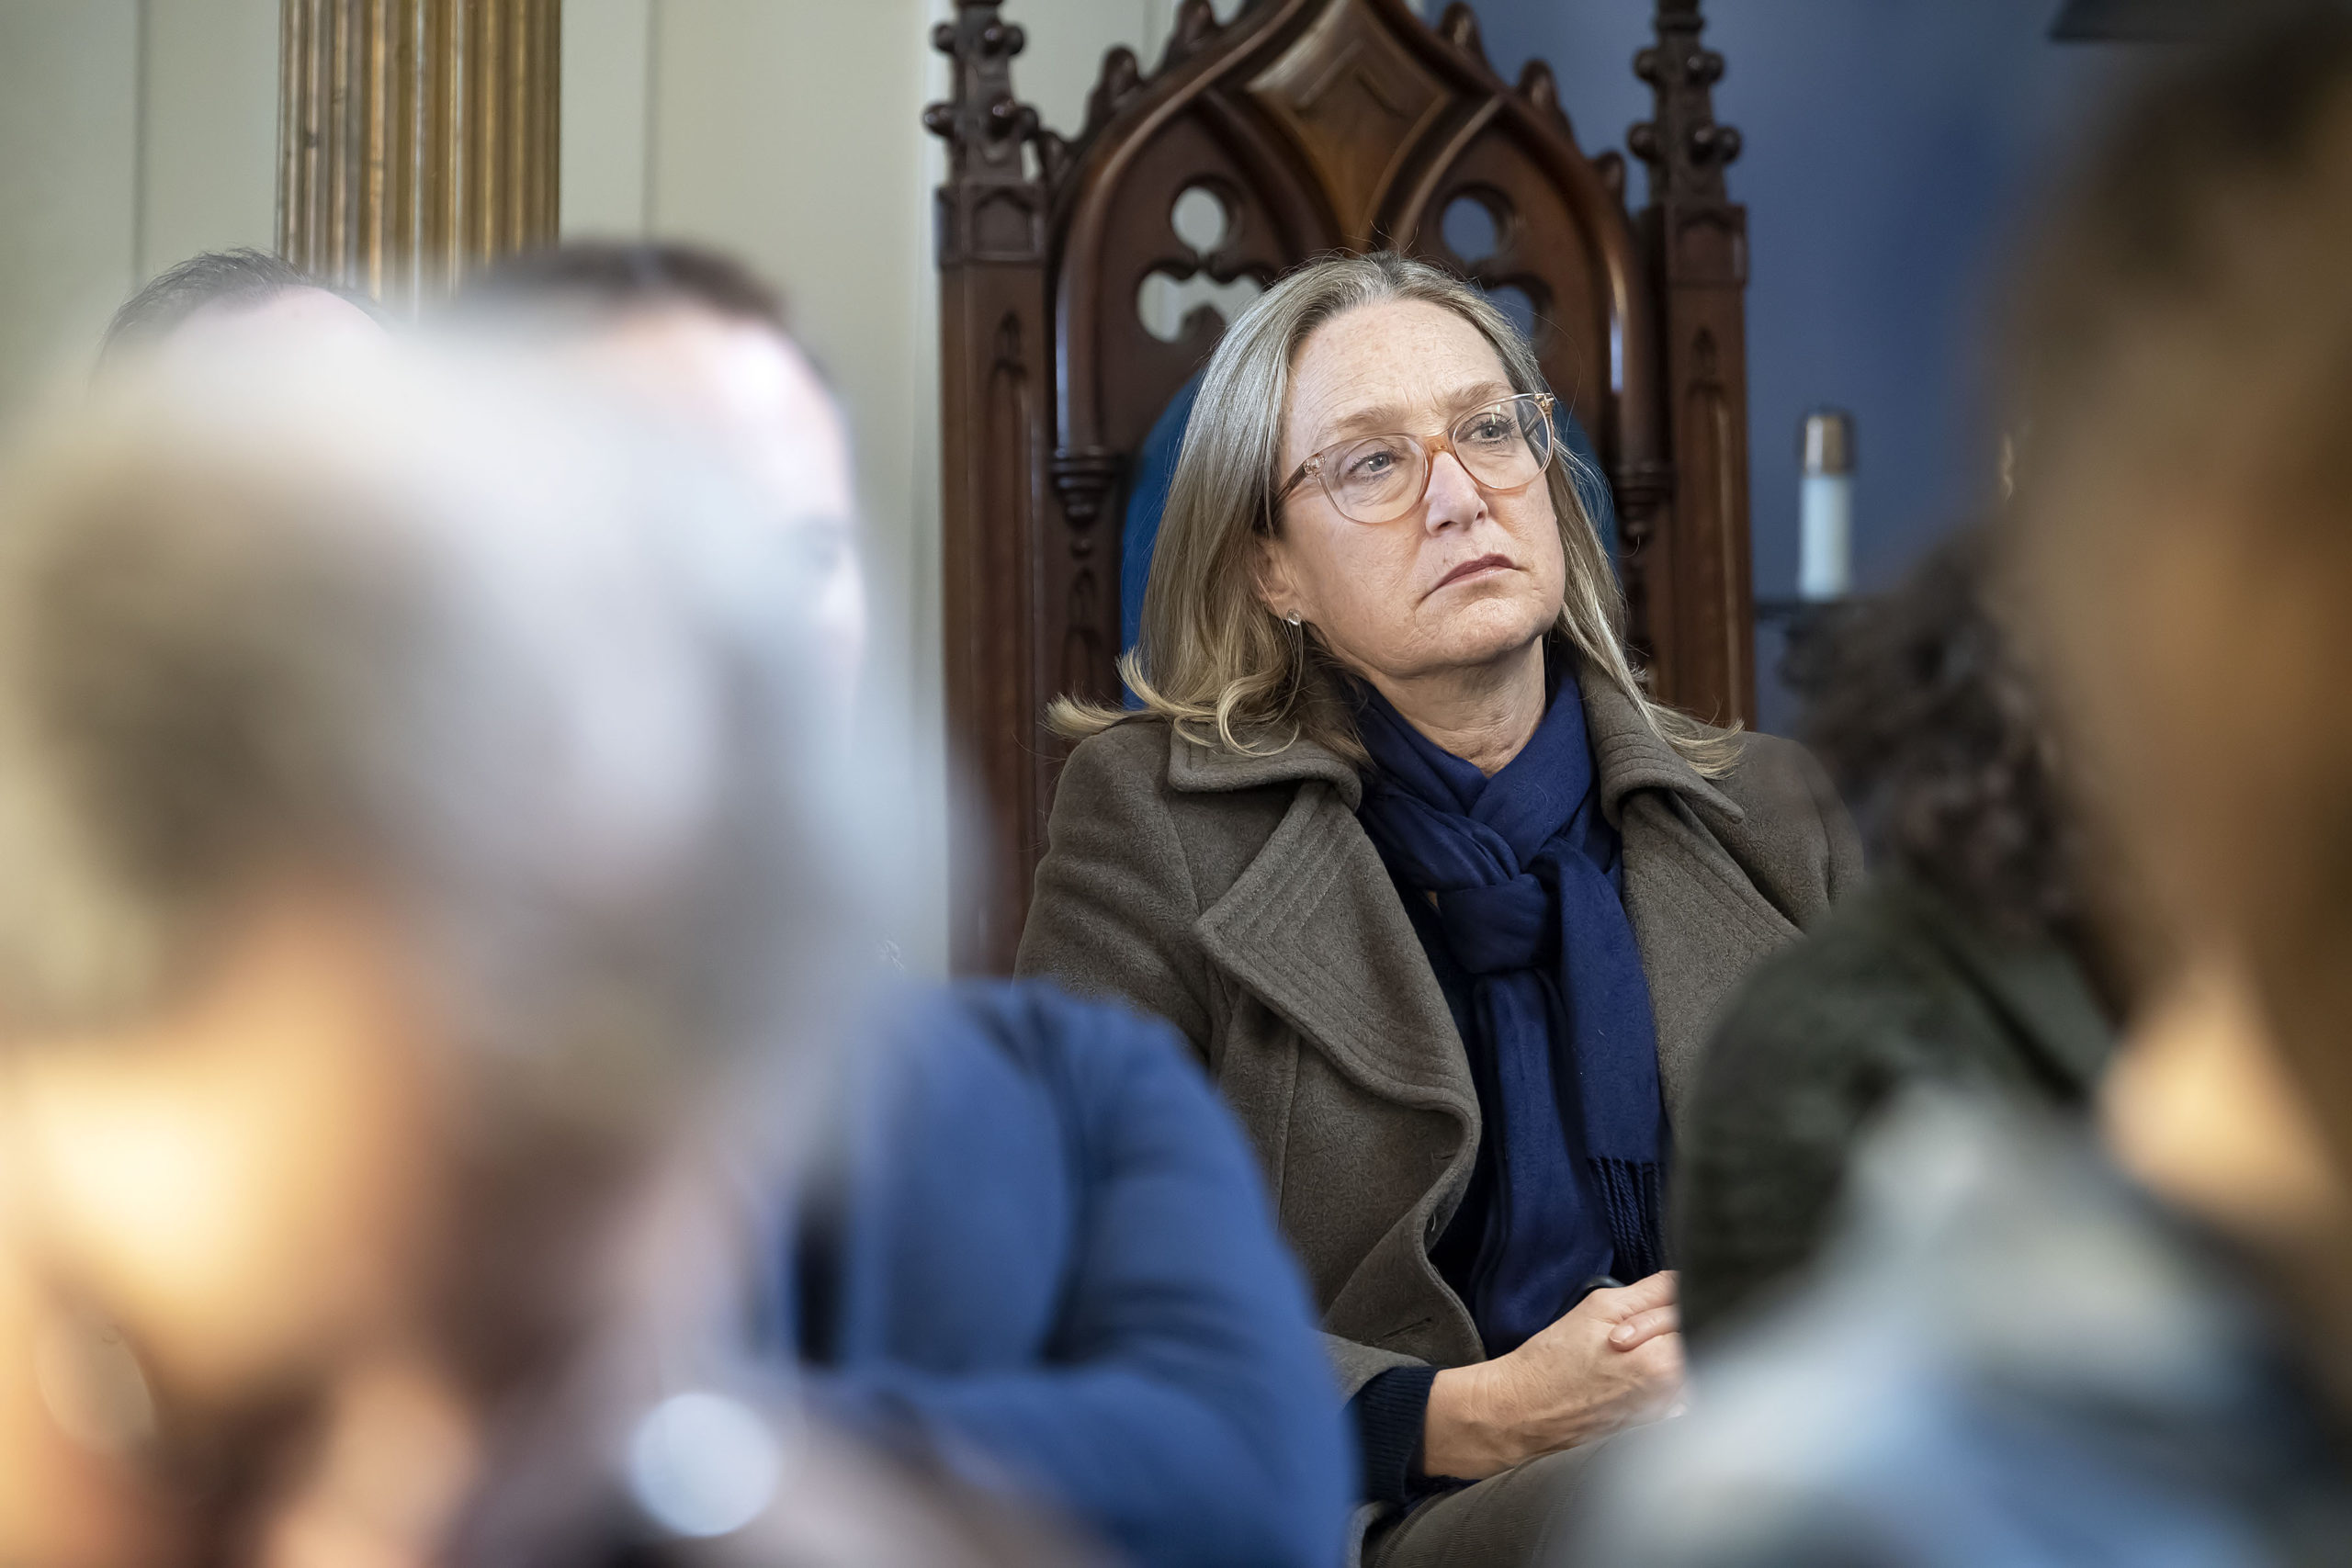 Suffolk County Legislator Bridget Fleming listens to the presentations during the New York State's Cannabis Programs in Context event that was hosted by David Falkowski and Open Minded Organics at the Masonic Lodge on Saturday afternoon.  MICHAEL HELLER